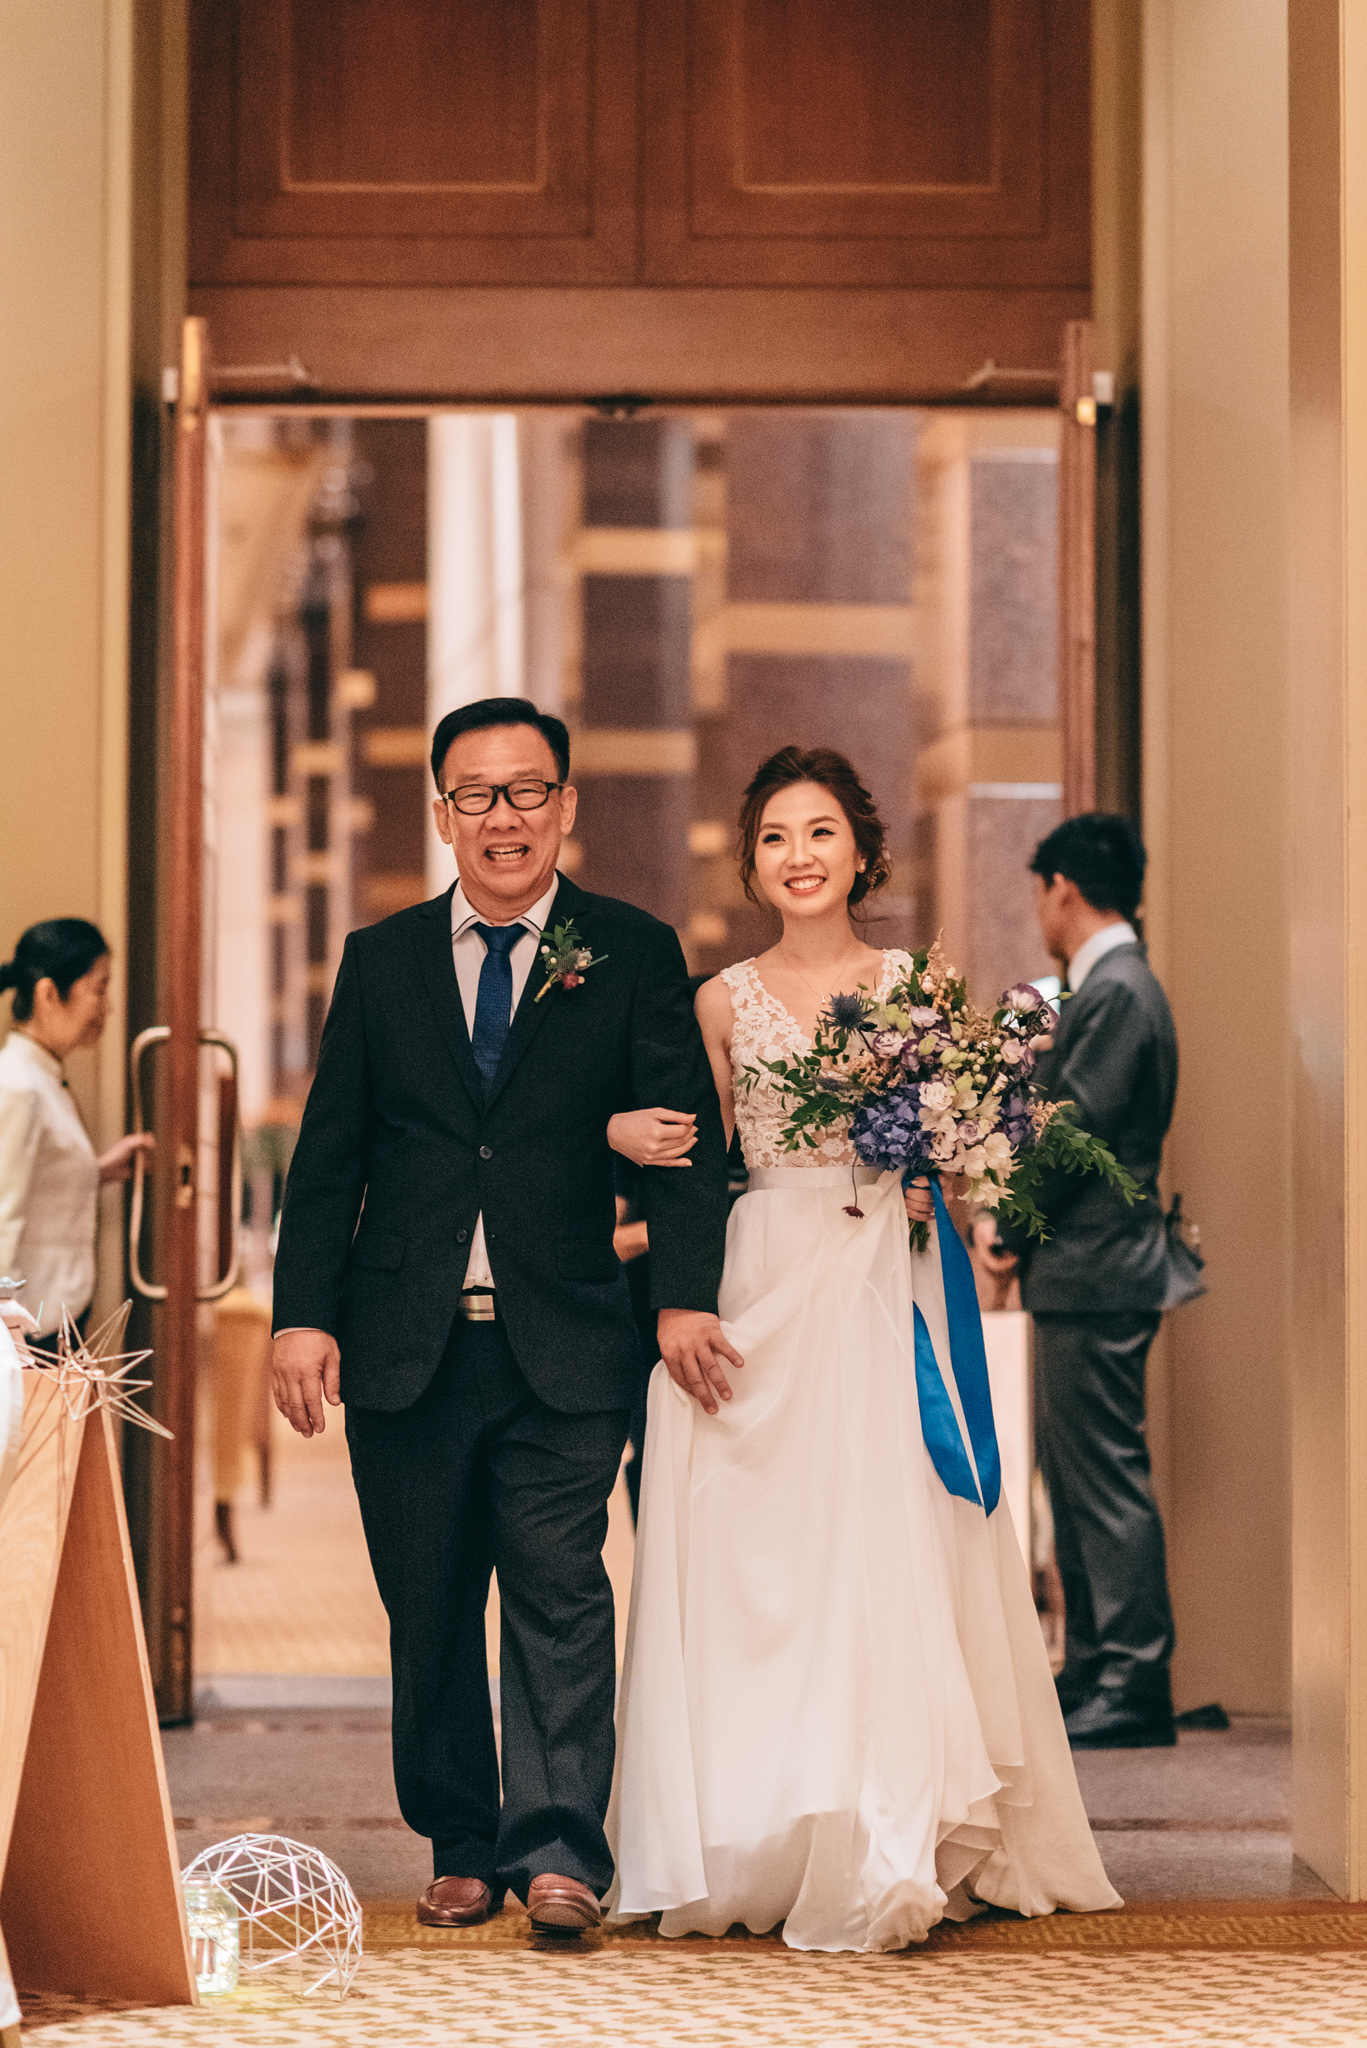 Eunice & Winshire Wedding Day Highlights (resized for sharing) - 130.jpg